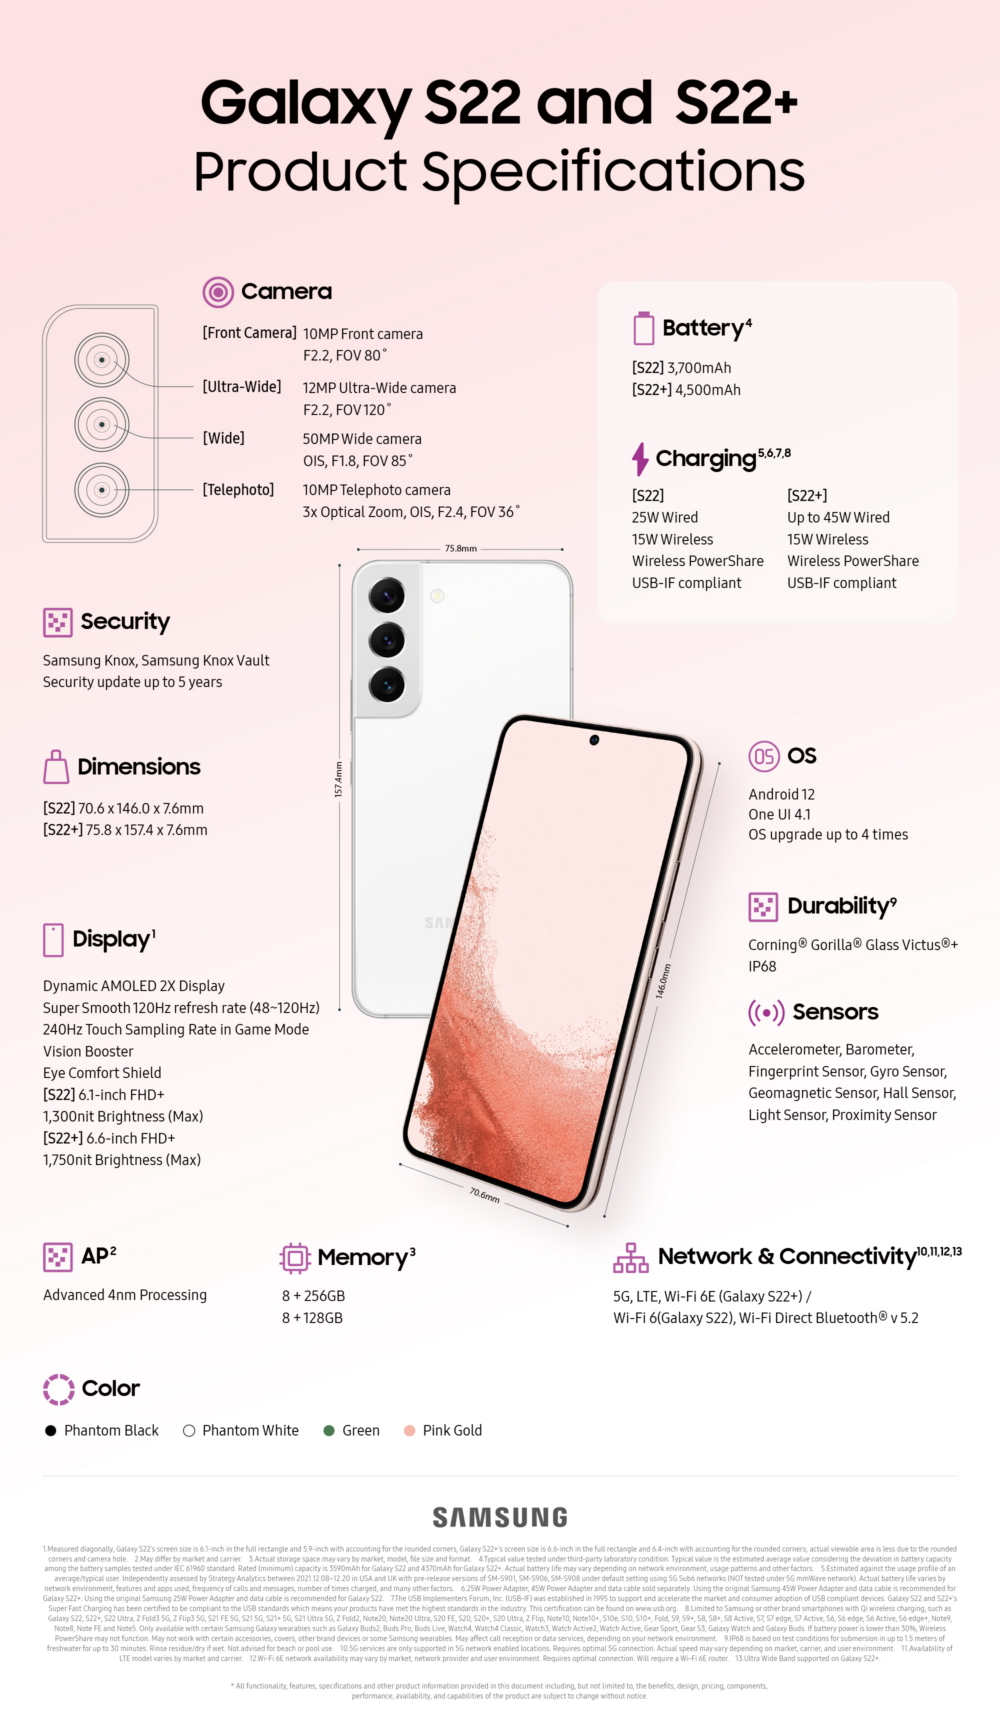 Galaxy S22 specs infographic - Samsung can't decide how inferior the Galaxy S22 display specs are to the S22 Ultra (update: official statement)